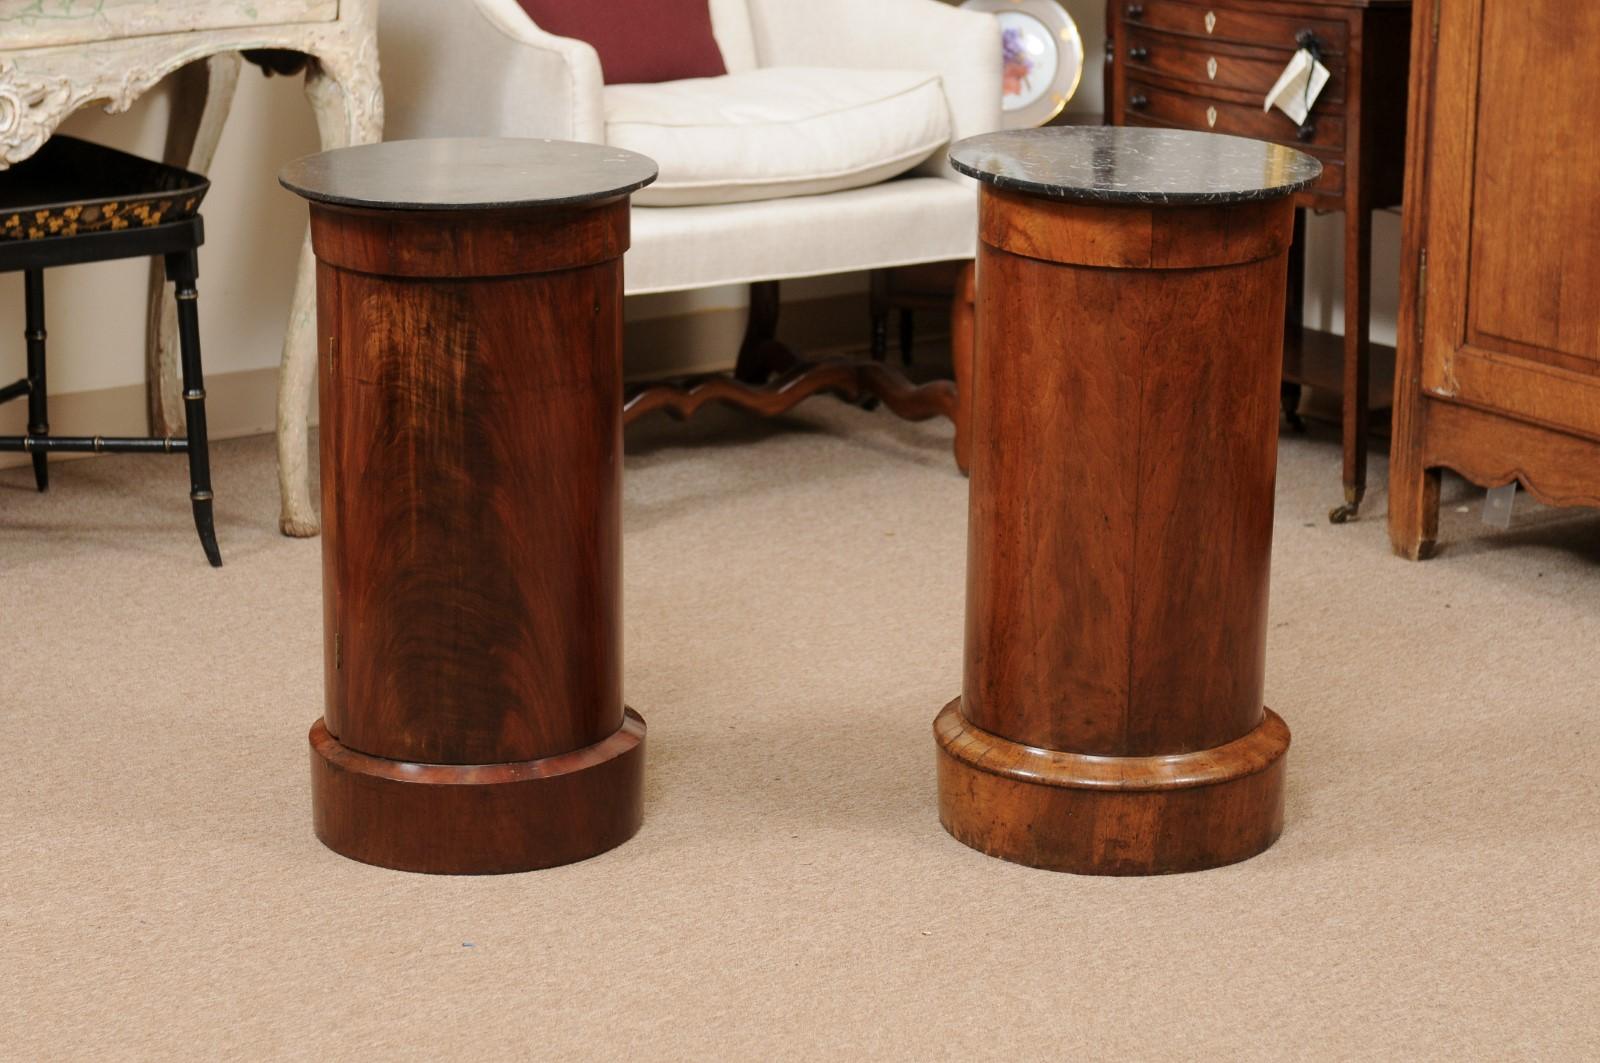 Matched Pair of Cylindrical Cabinets in Mahogany with Black Marble Tops 1